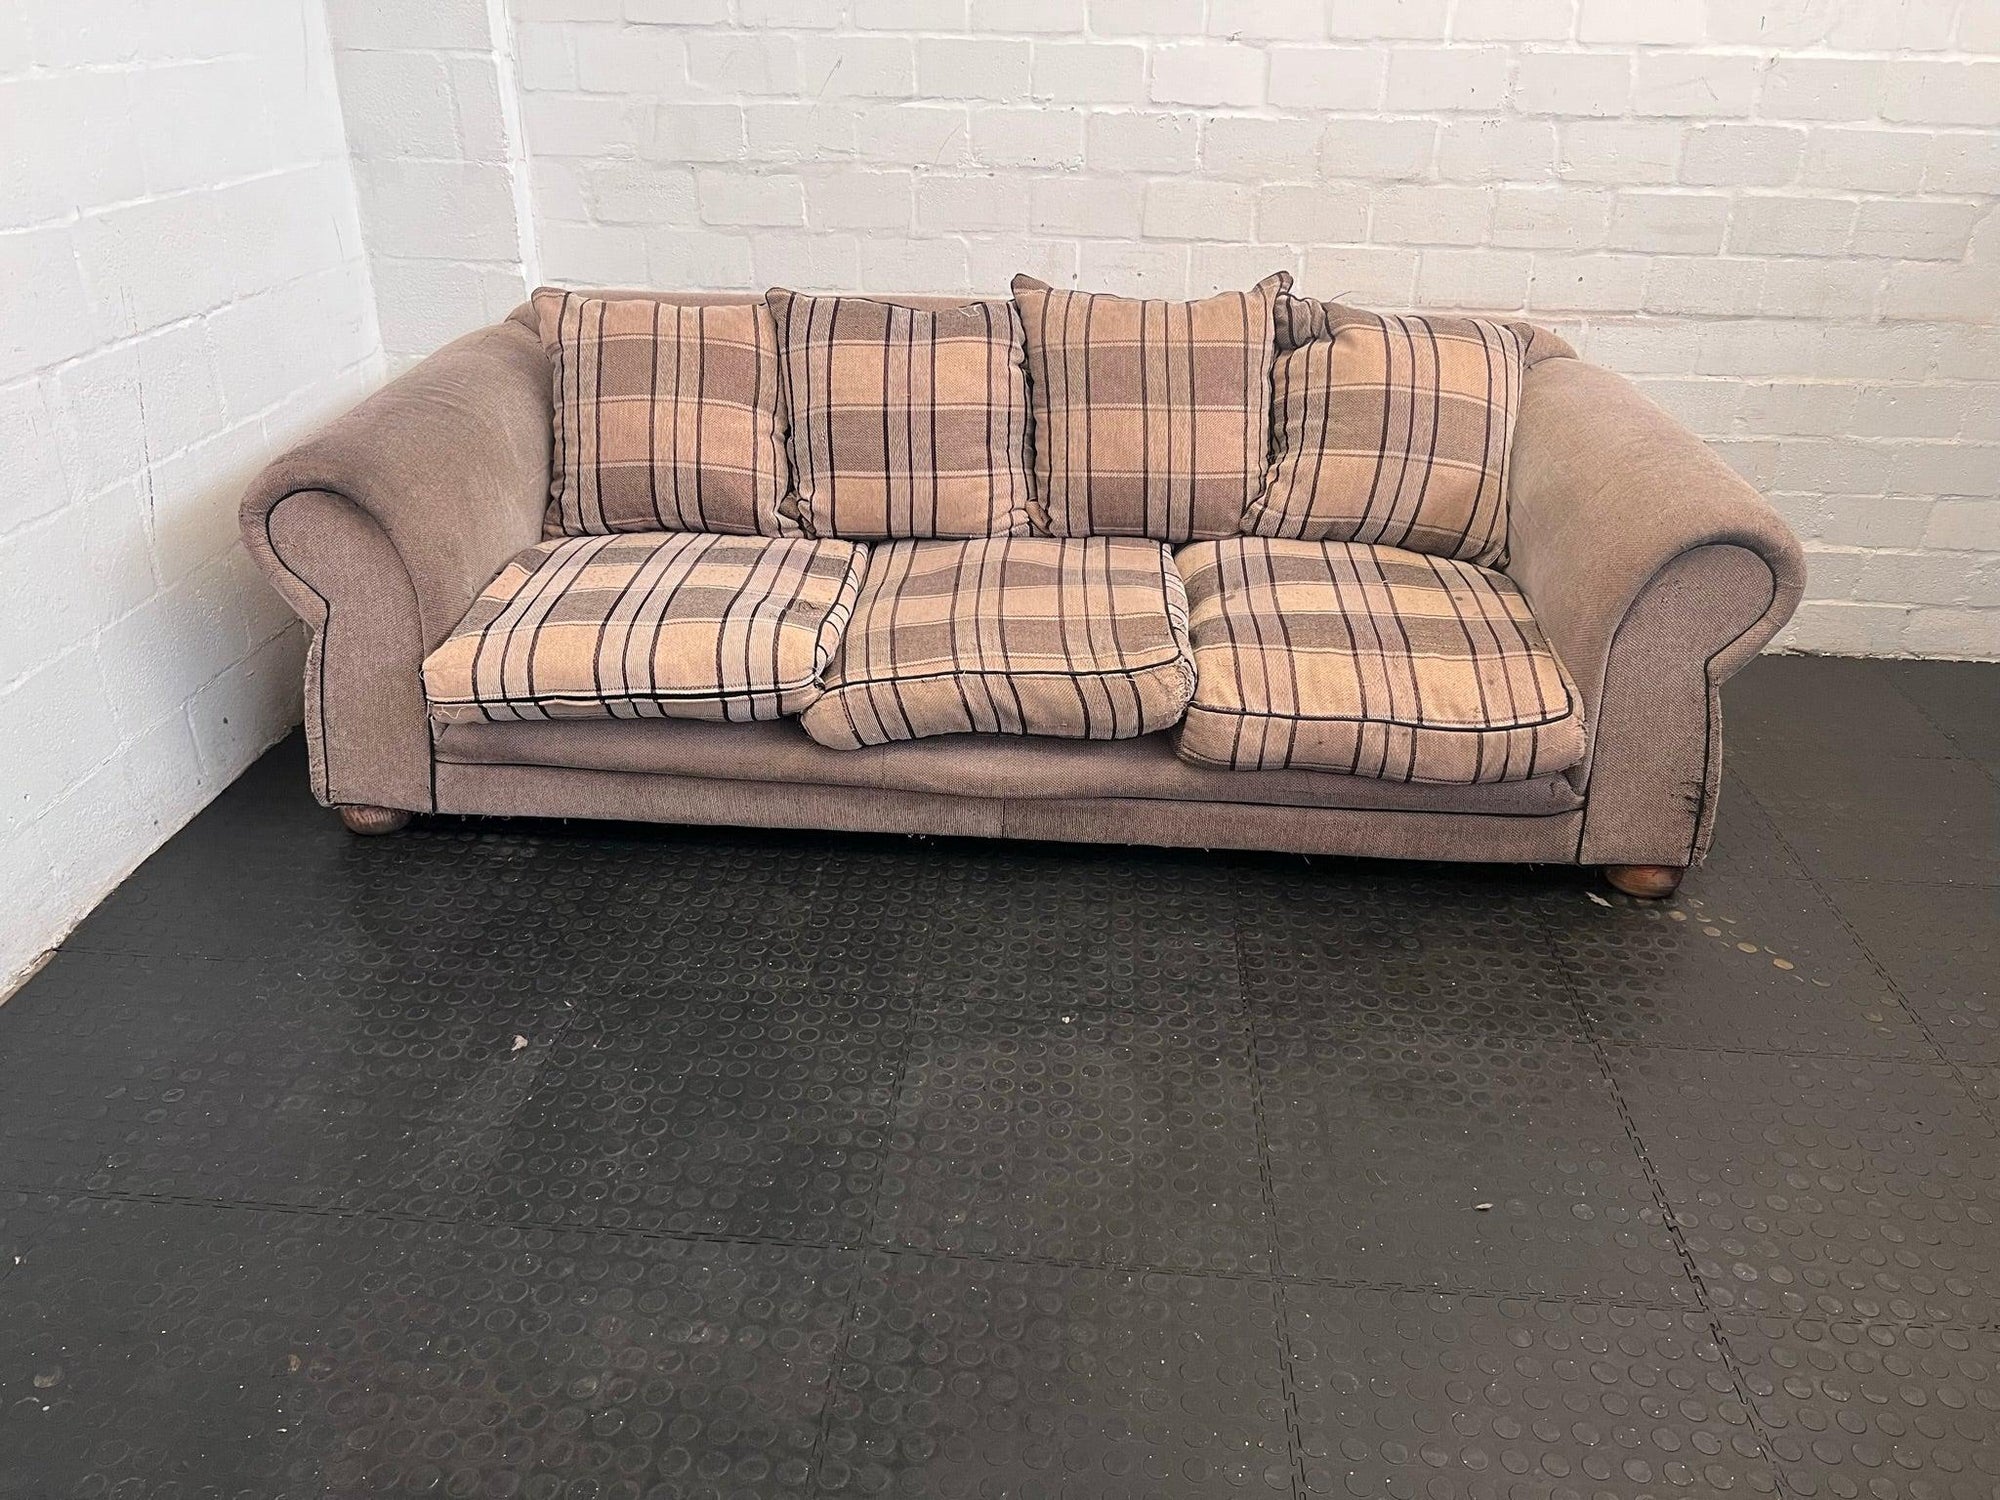 Beige Material 3 Seater Couch - REDUCED